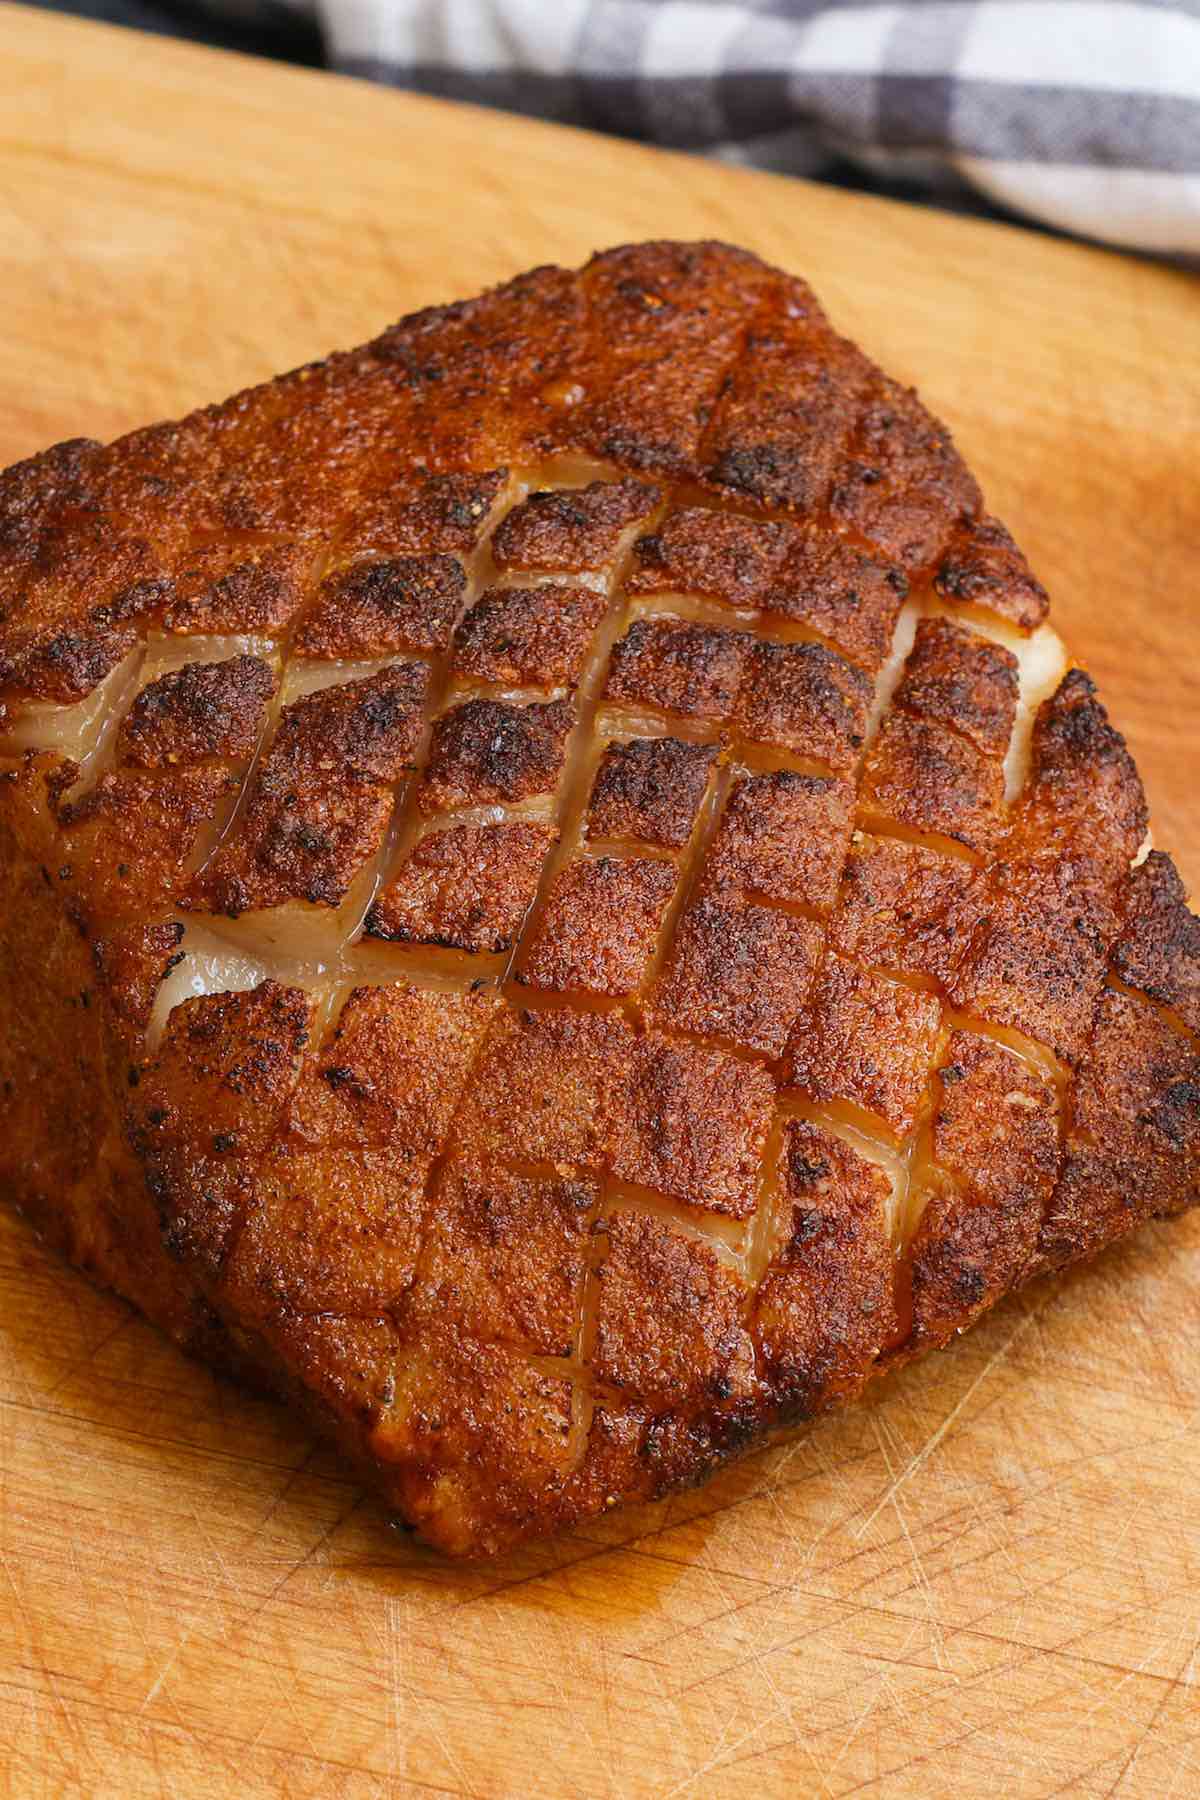 The dry spice rub produces a beautiful crust on the outside of the meat during smoking